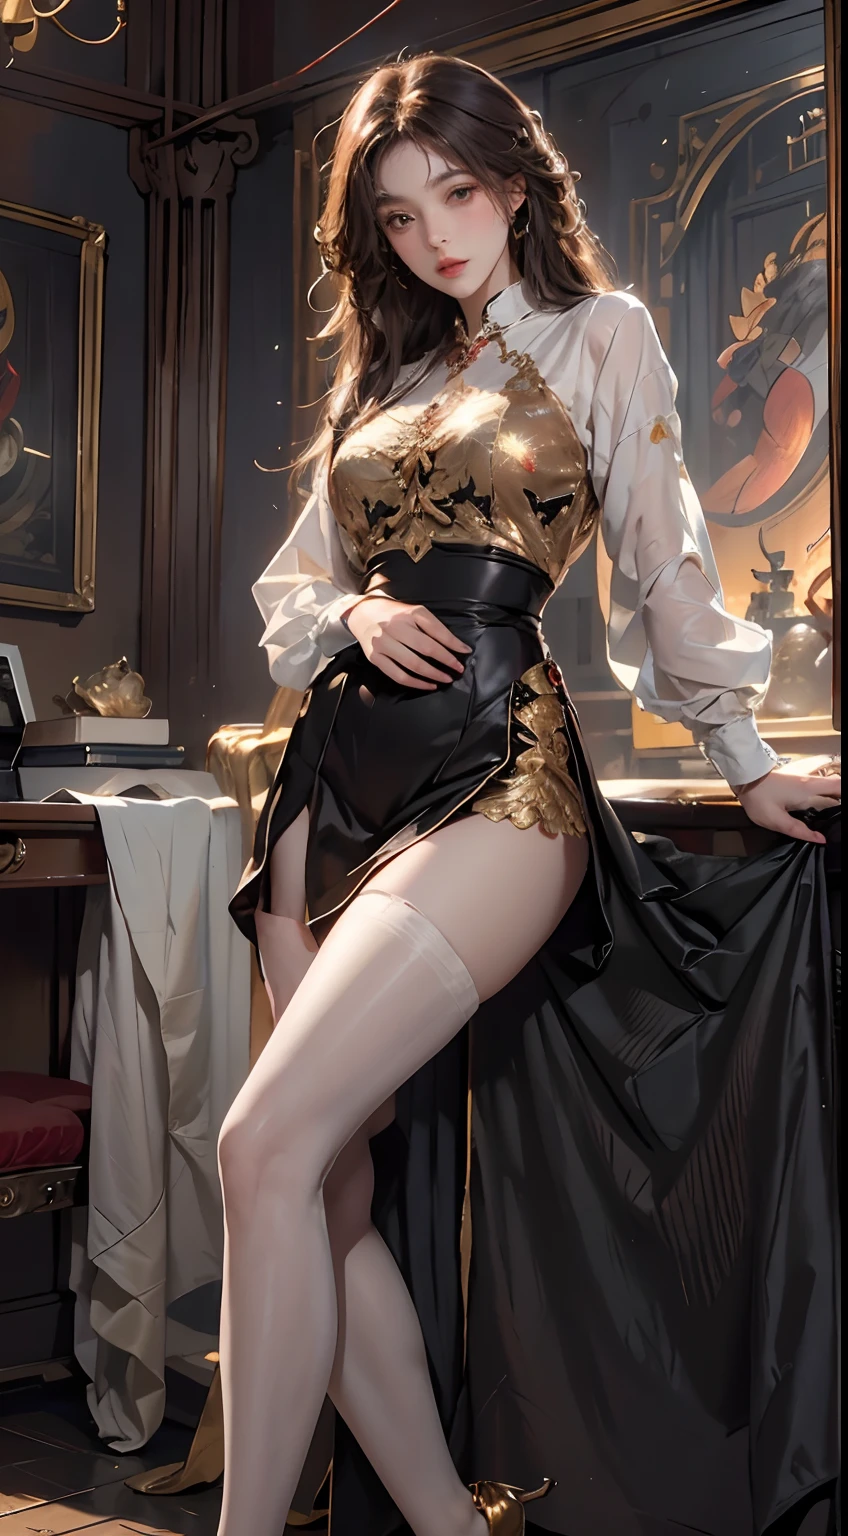 ((Masterpiece, Highest quality)), Detailed face, CharacterDesignSheet，full bodyesbian, Full of details, Multiple poses and expressions, Highly detailed, Depth, Many parts，beuaty girl，cinmatic lighting，with light glowing，Red and gold，Phoenix decoration，light yarn，Lace，lacepantyhose，high-heels